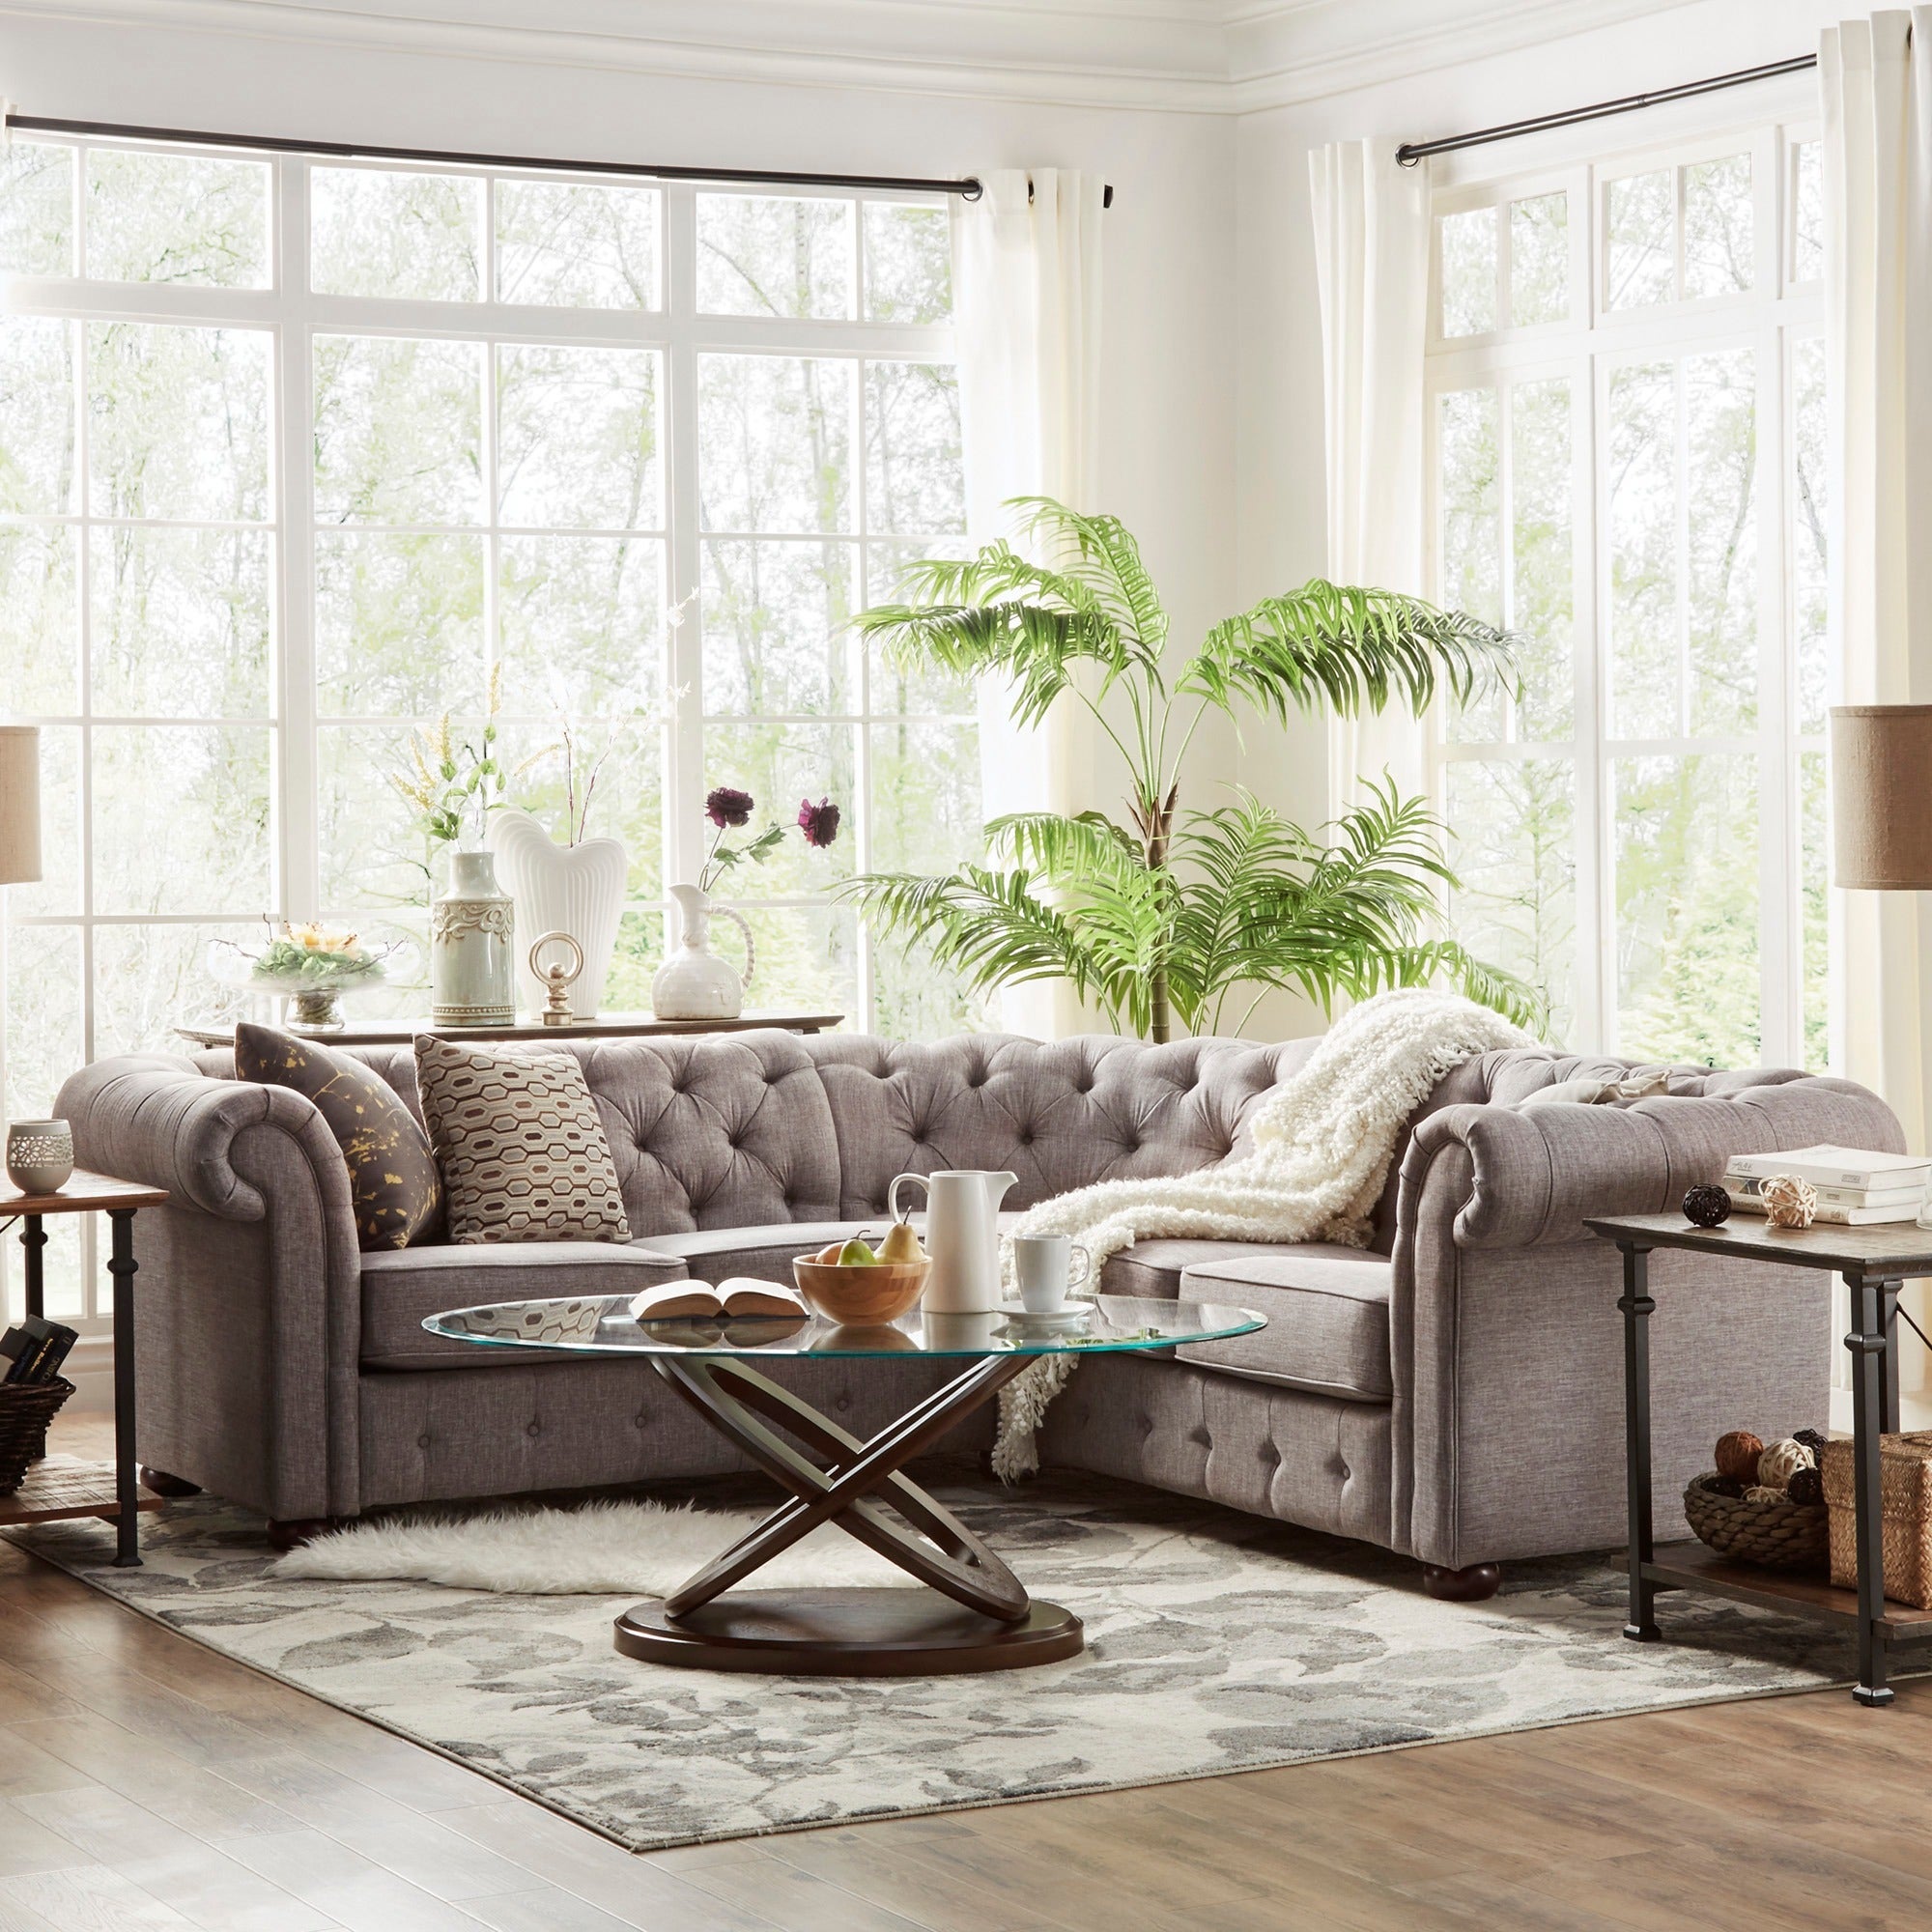 5-Seat L-Shaped Chesterfield Sectional Sofa